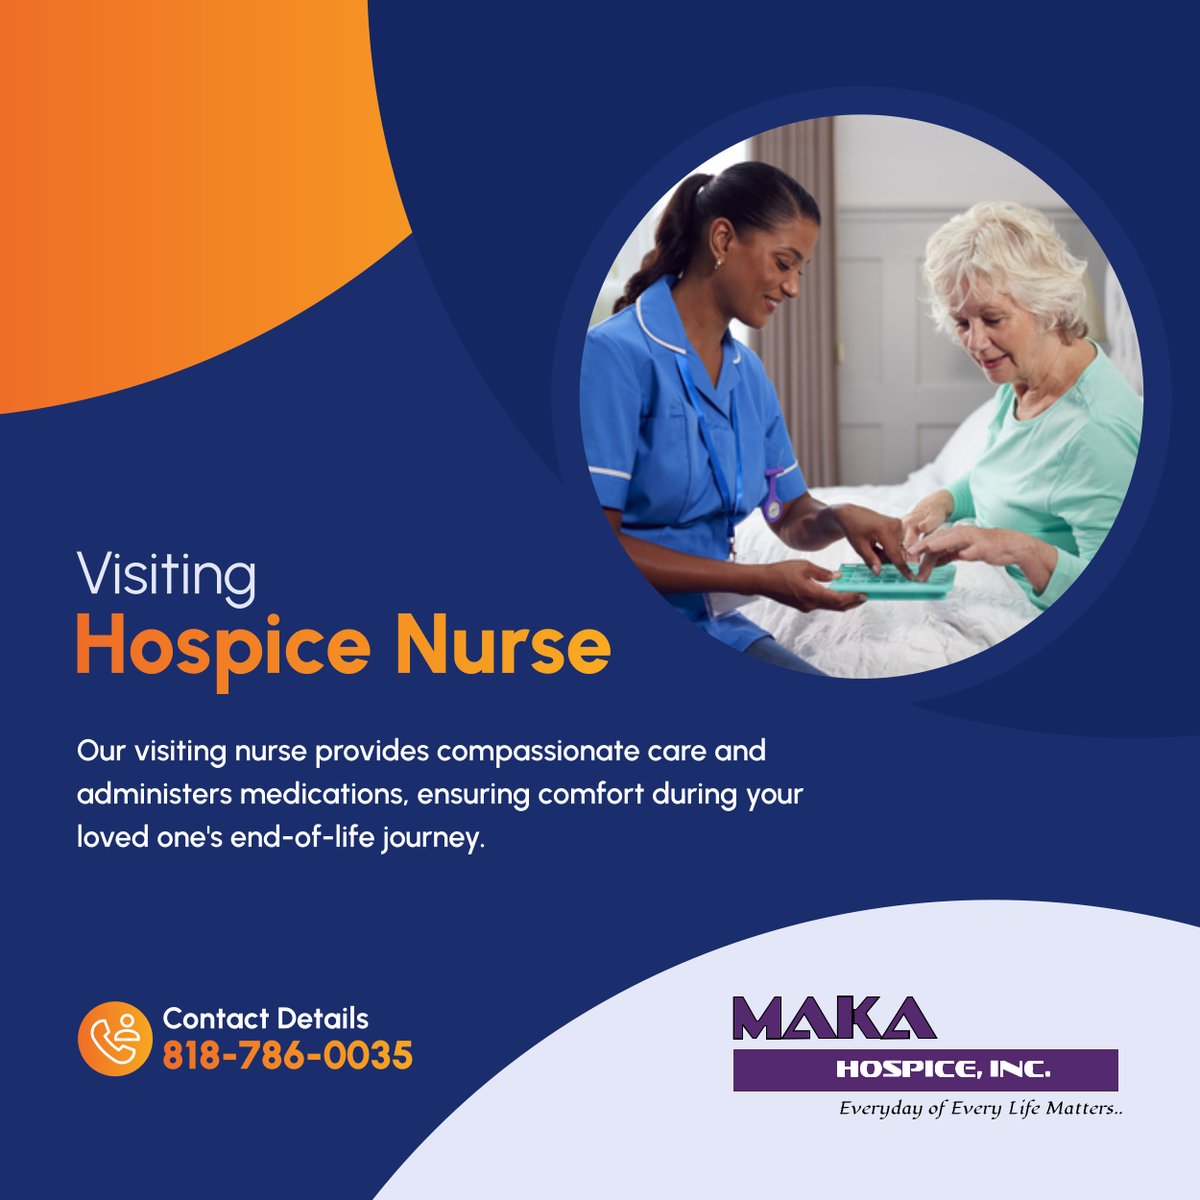 Our Visiting Hospice Nurse offers compassionate care and medication support. Contact us today for expert end-of-life assistance.

#VanNuysCA #HospiceCare #EndOfLifeSupport